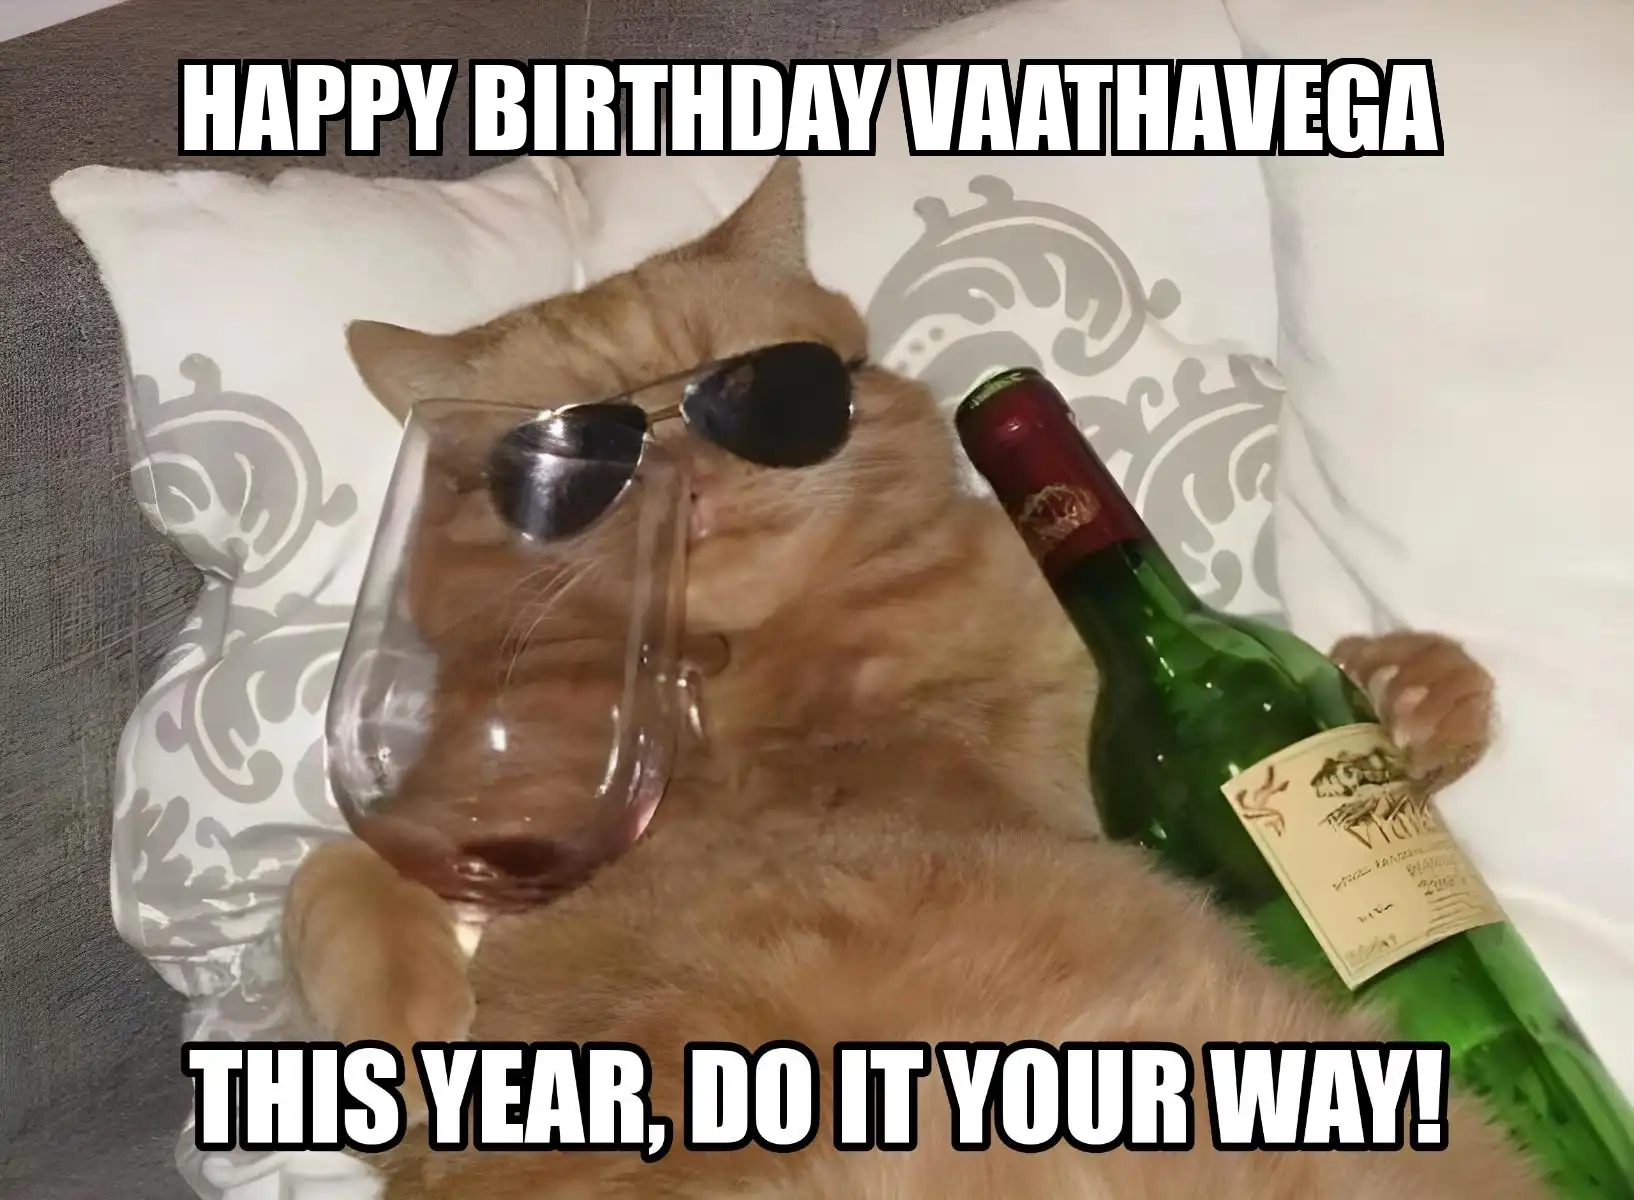 Happy Birthday Vaathavega This Year Do It Your Way Meme